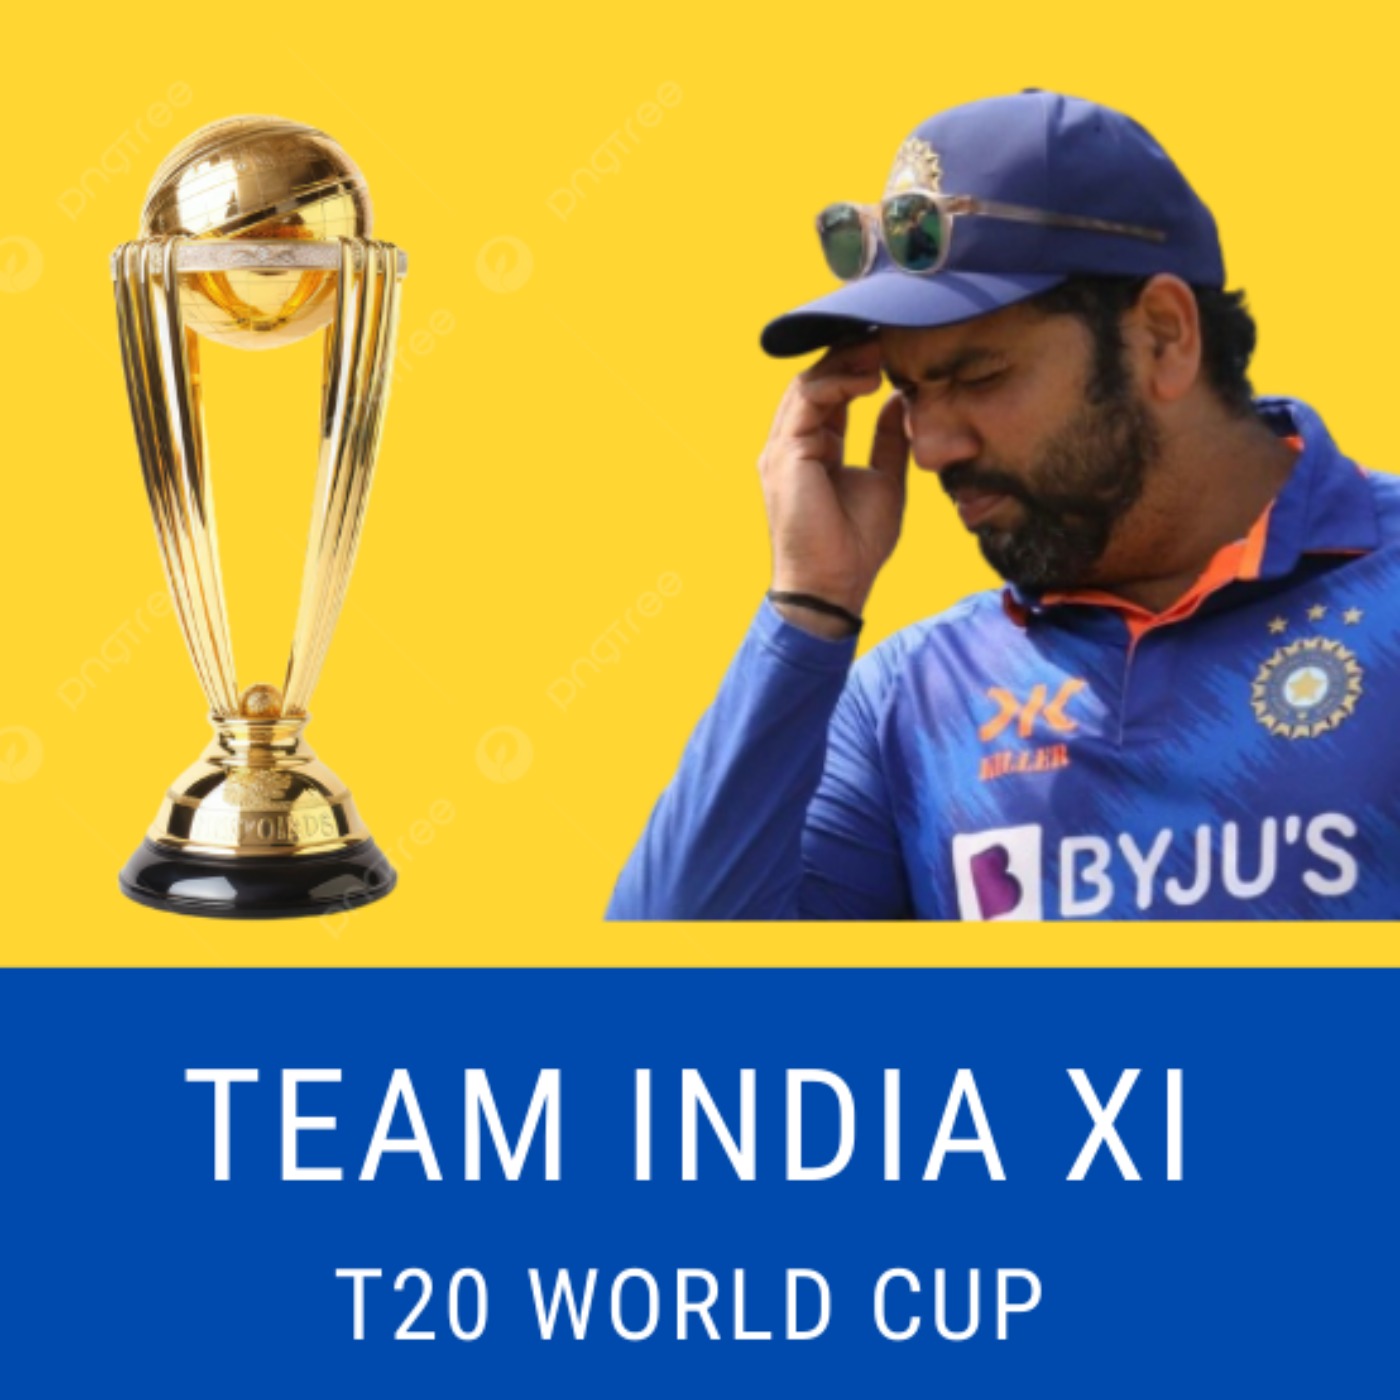 Can India win the World T20 without Kohli and Jaiswal? - Our T20 World cup India XI vs Selectors XI -  - Episode 18